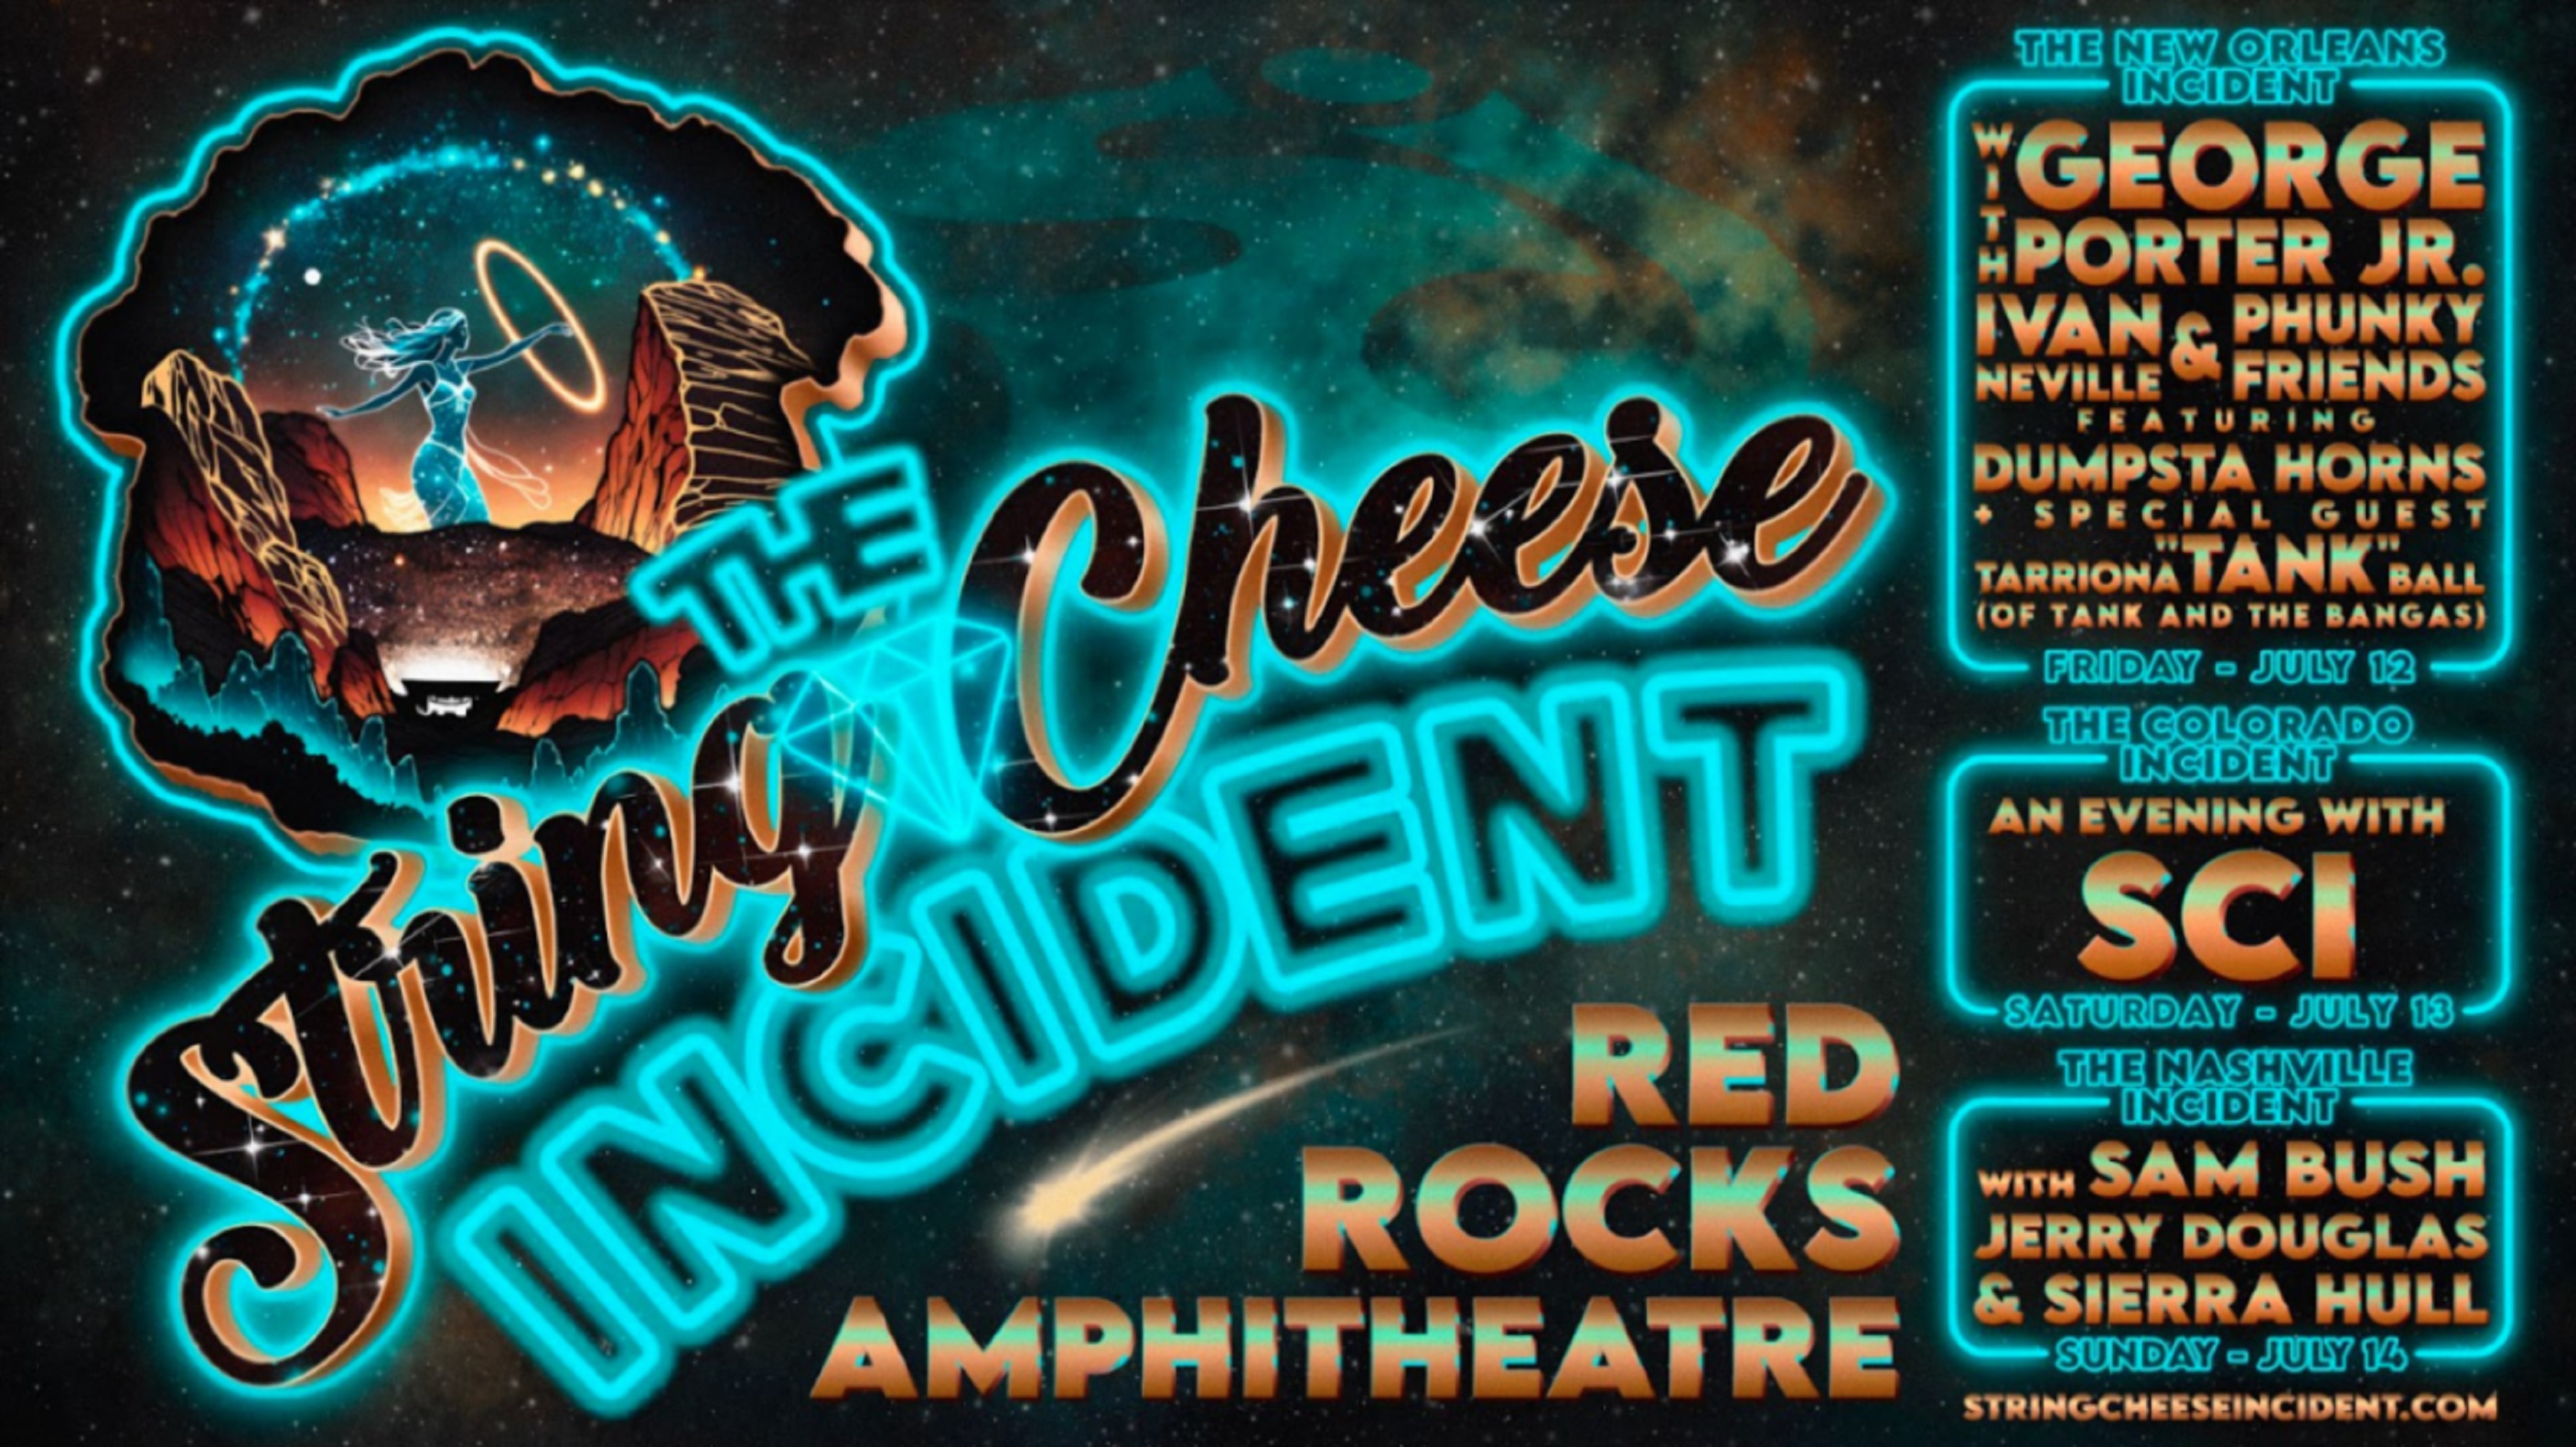 The String Cheese Incident announces themes for 2024 Red Rocks run; The New Orleans Incident, The Colorado Incident, The Nashville Incident